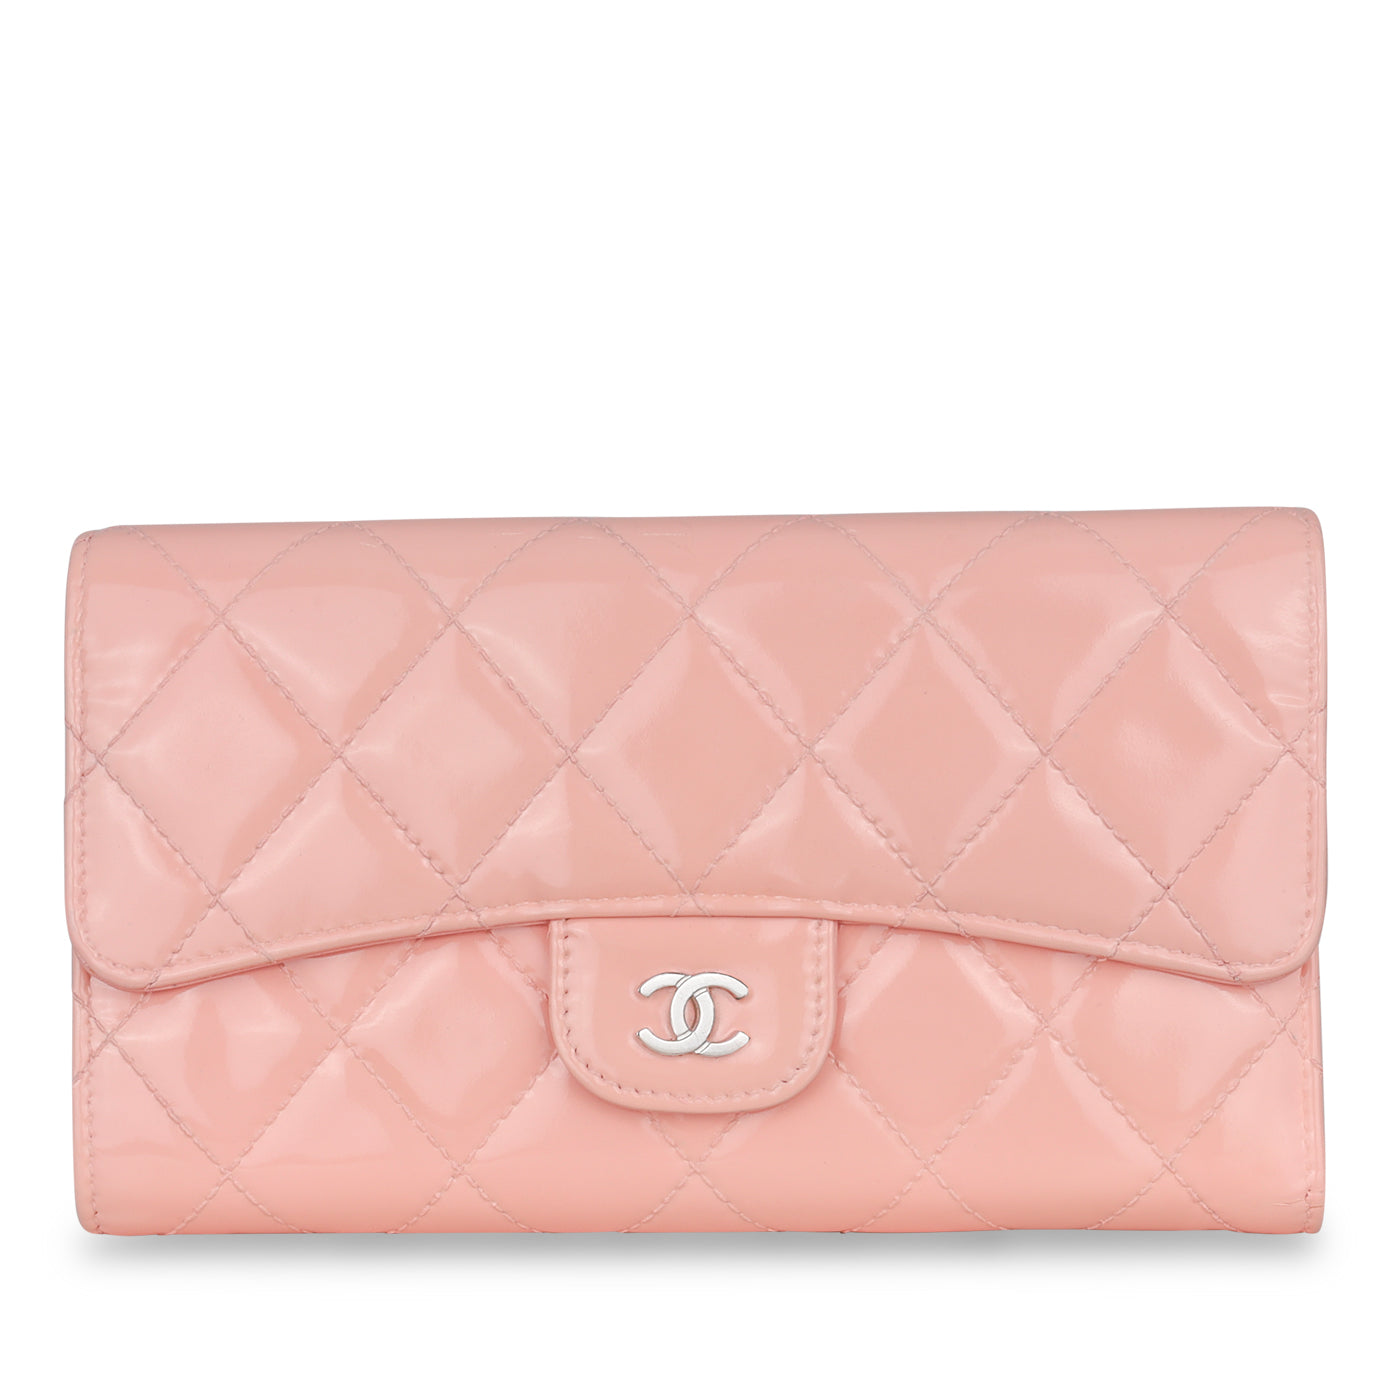 Chanel - Classic Flap Wallet - Patent Pink - Pre-Loved